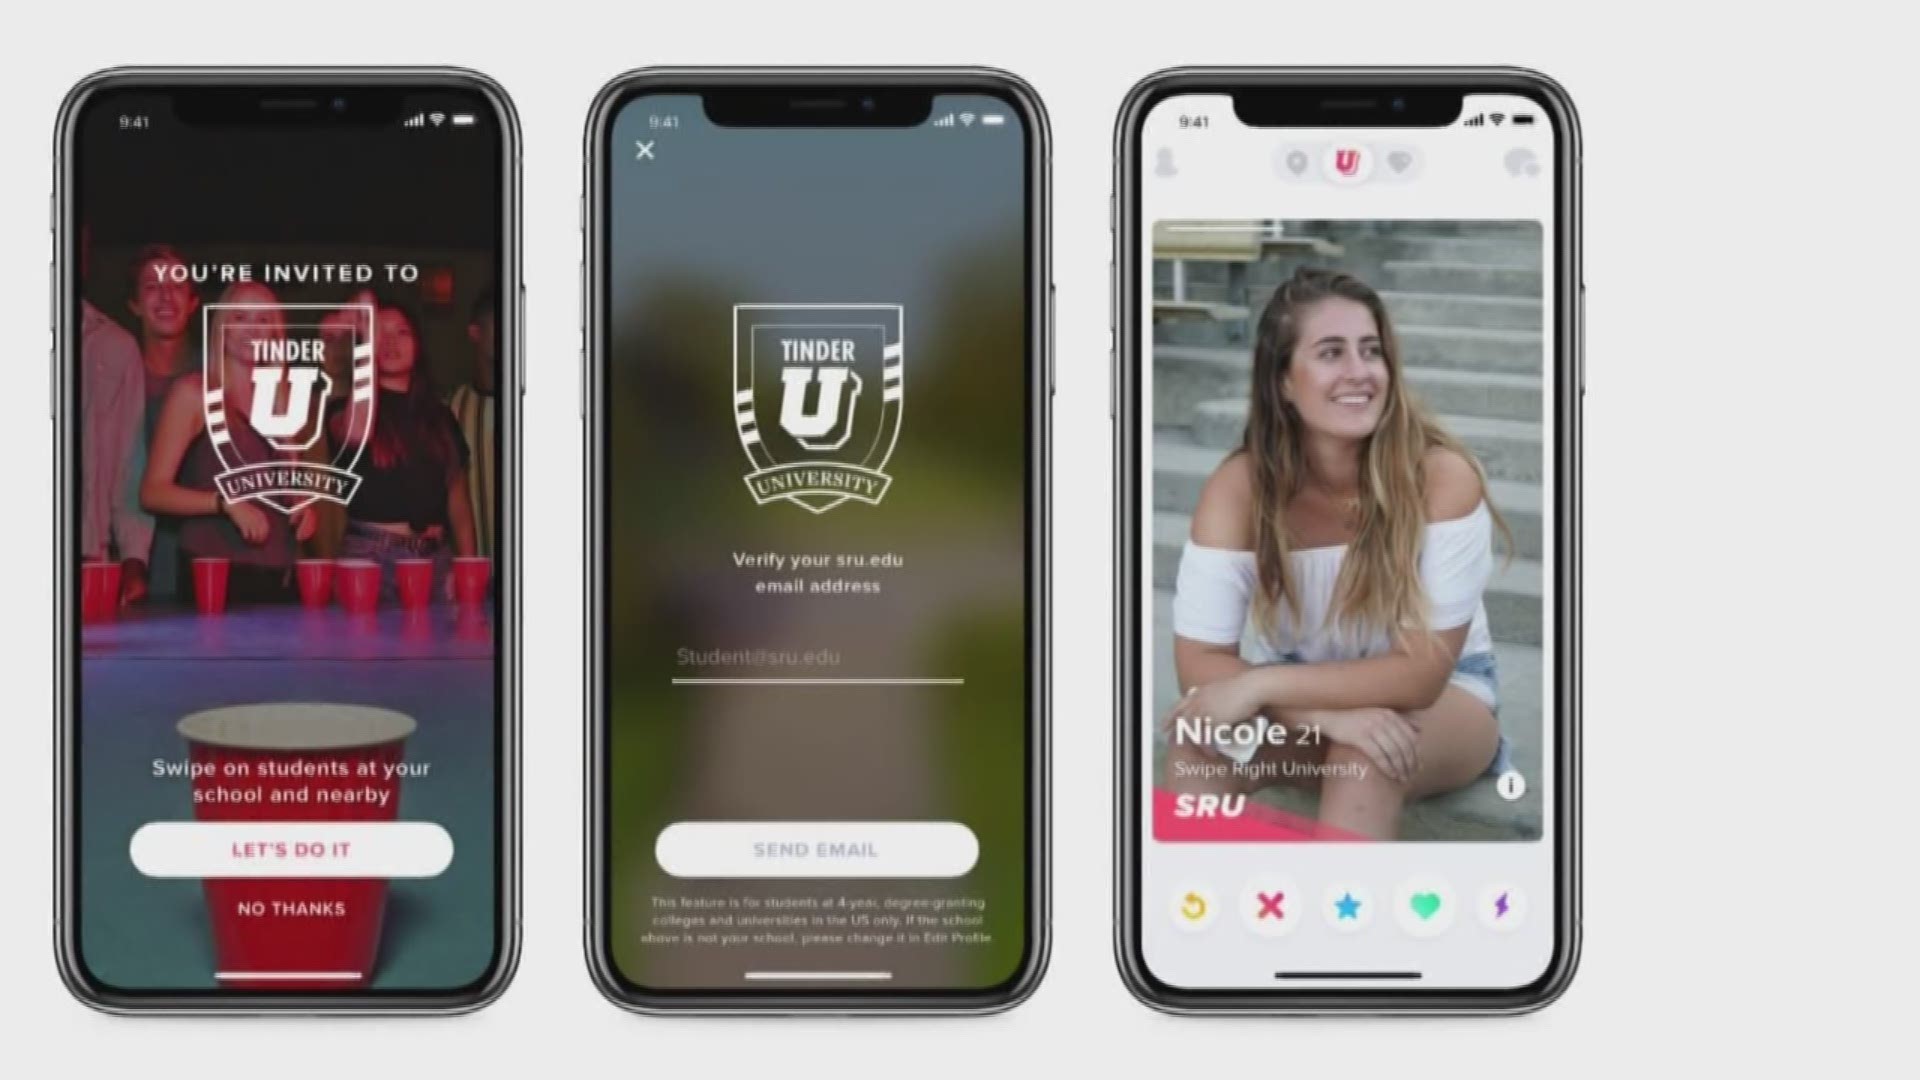 Tinder-U was designed to make students feel safer, and whether it does -- it definitely can't work if students aren't using it.